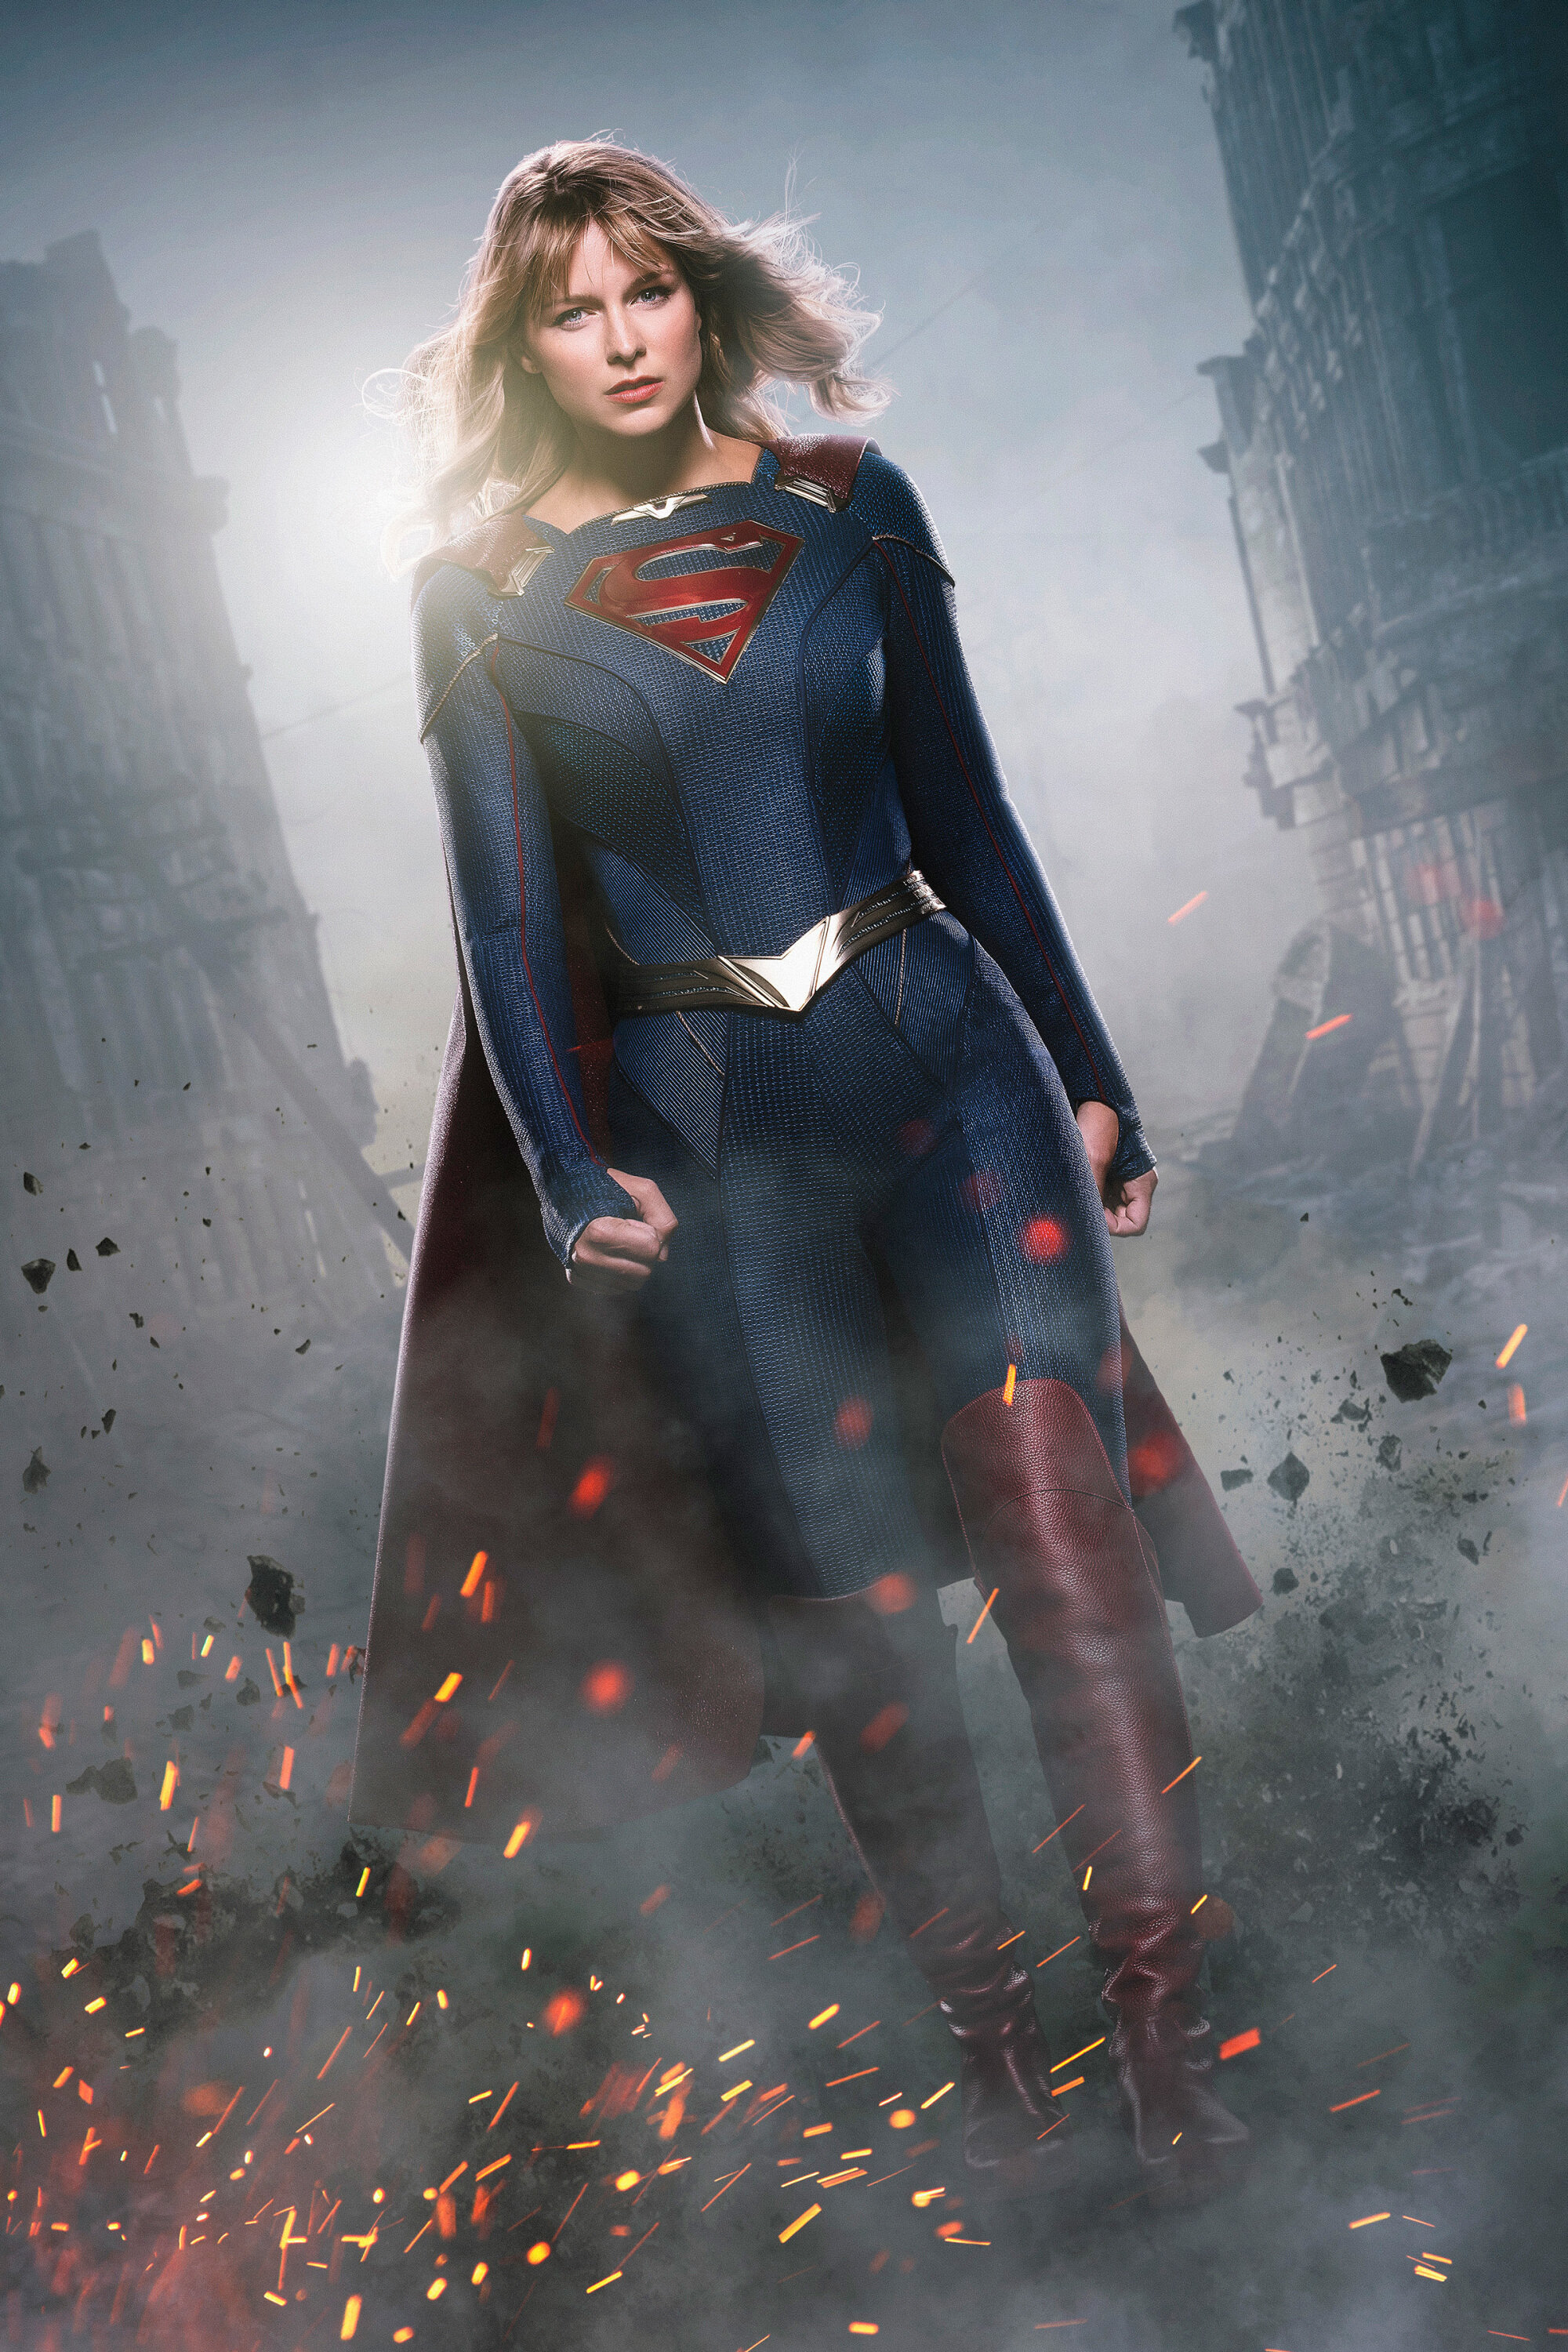 Promotional Material for "Supergirl"